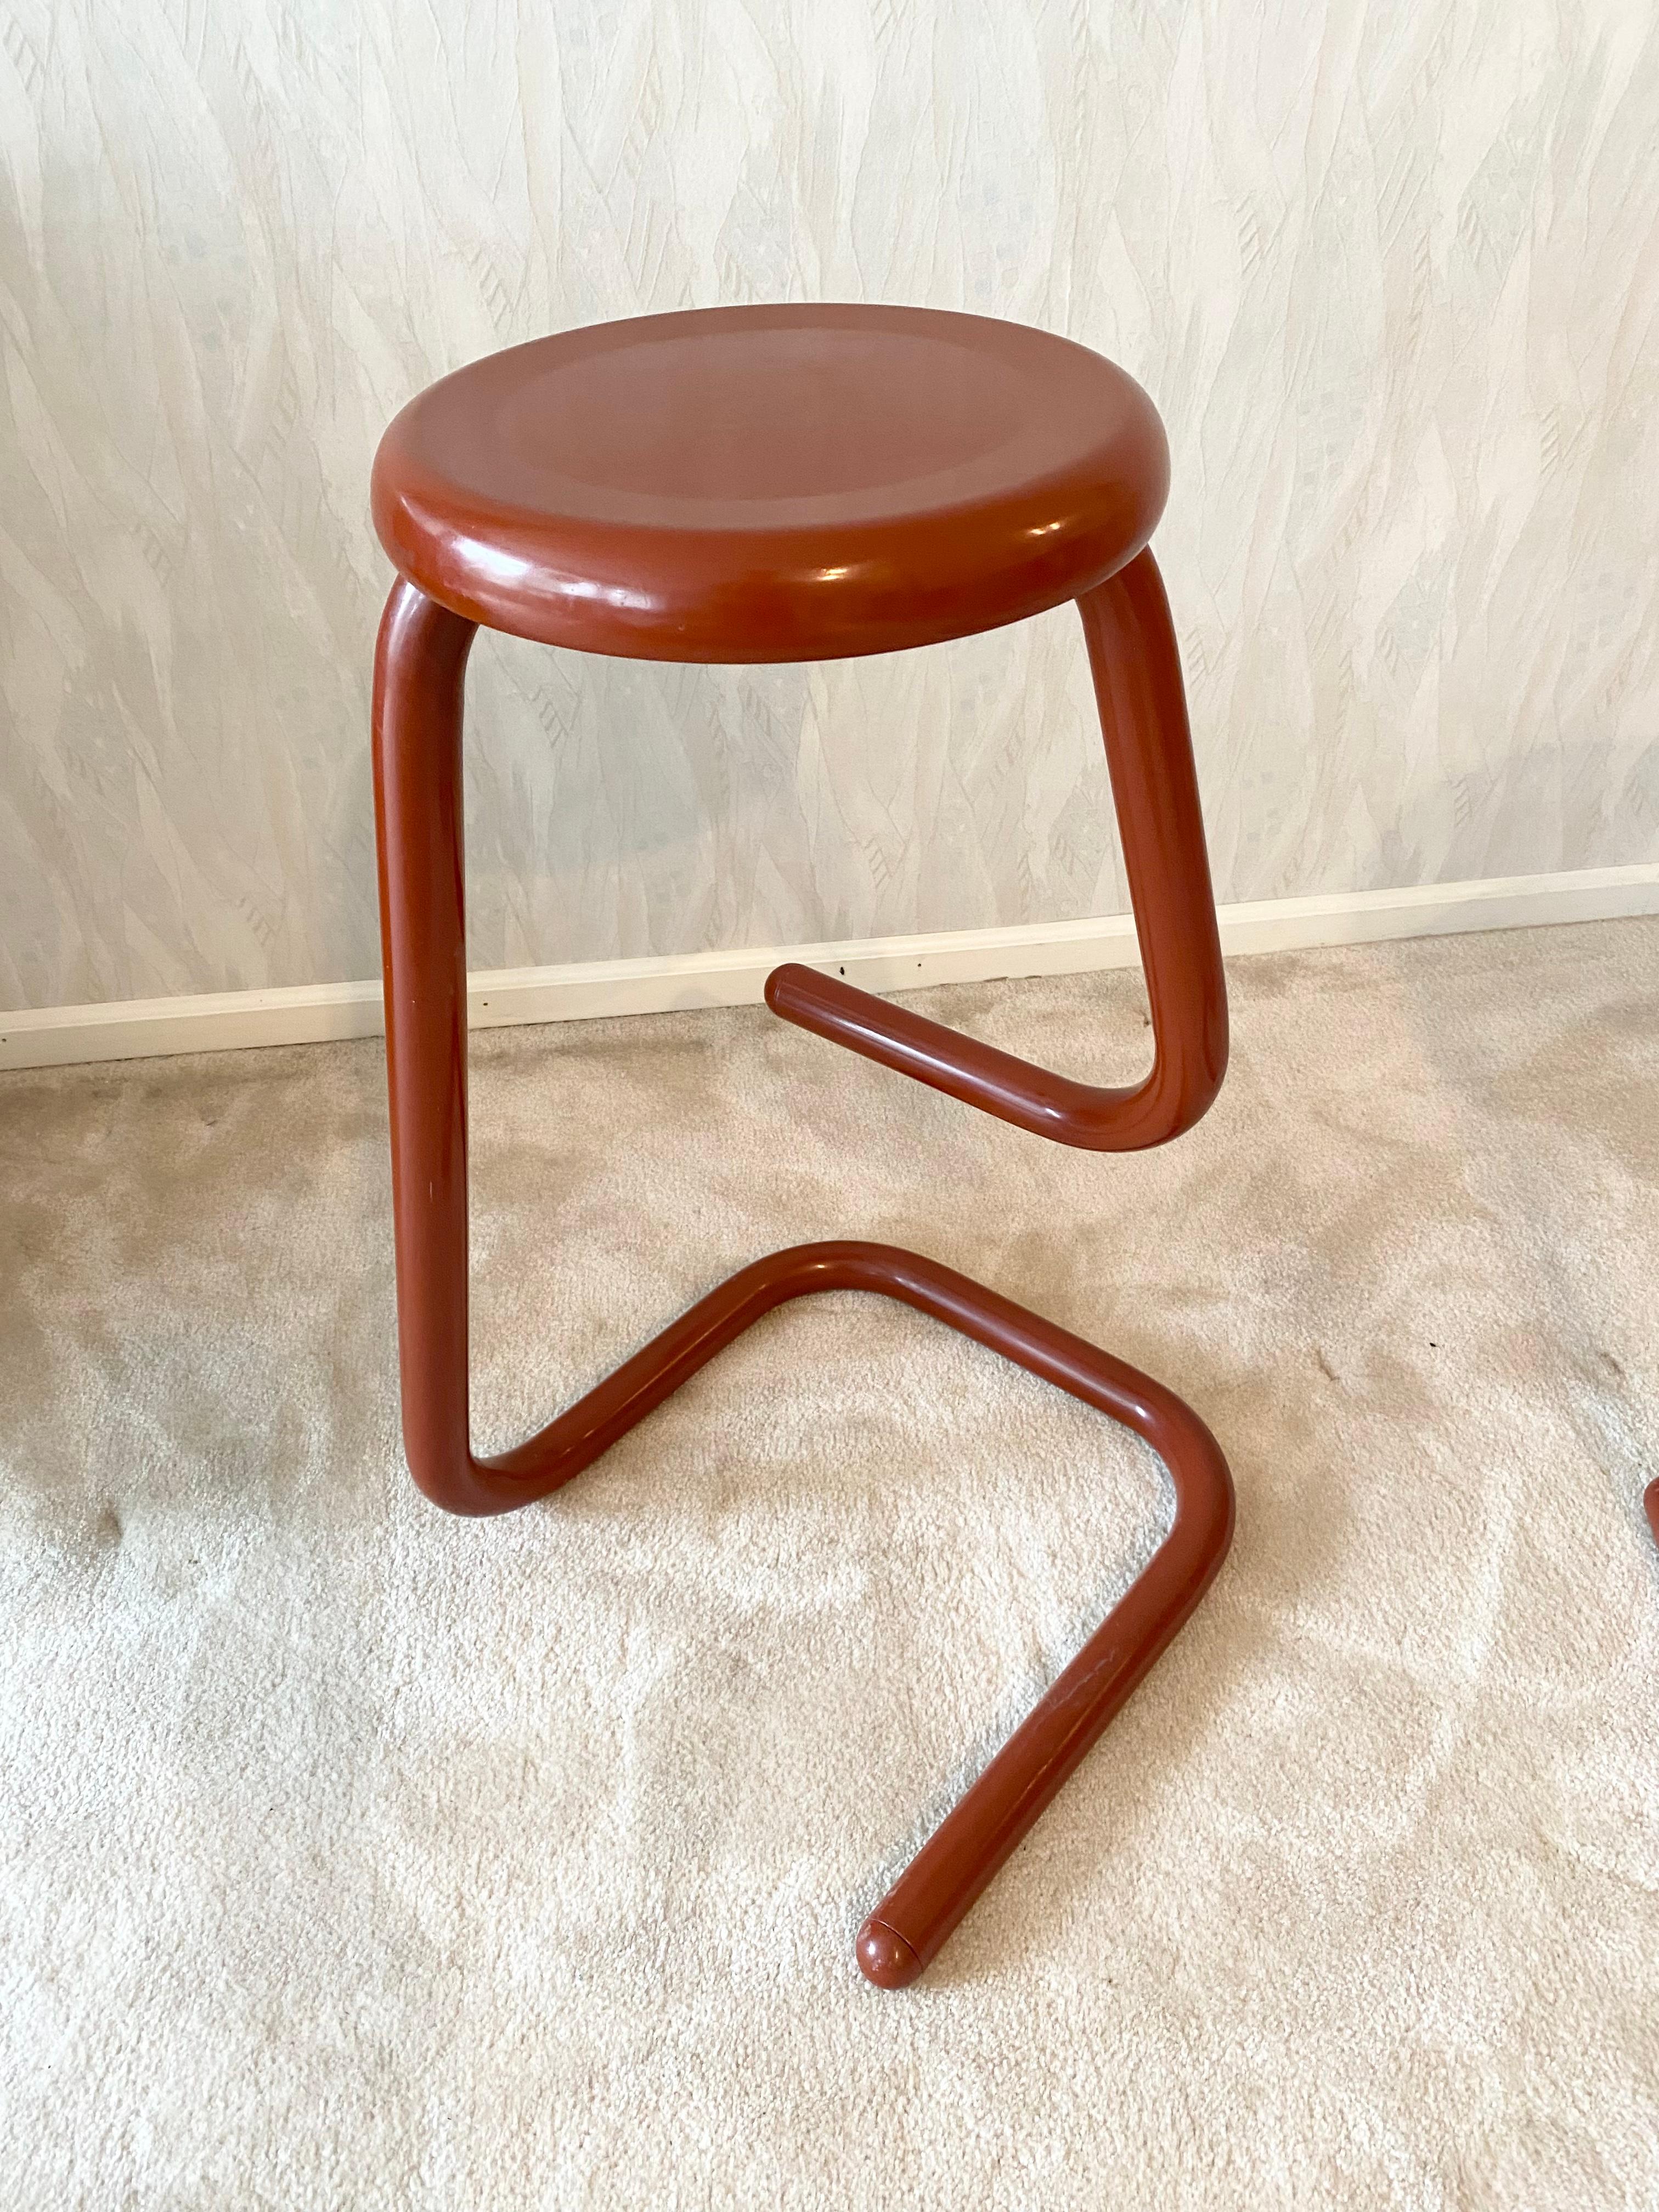 Canadian Near Perfect Pair of Red Vintage 1980s K700 Paperclip Stools by Kinetics